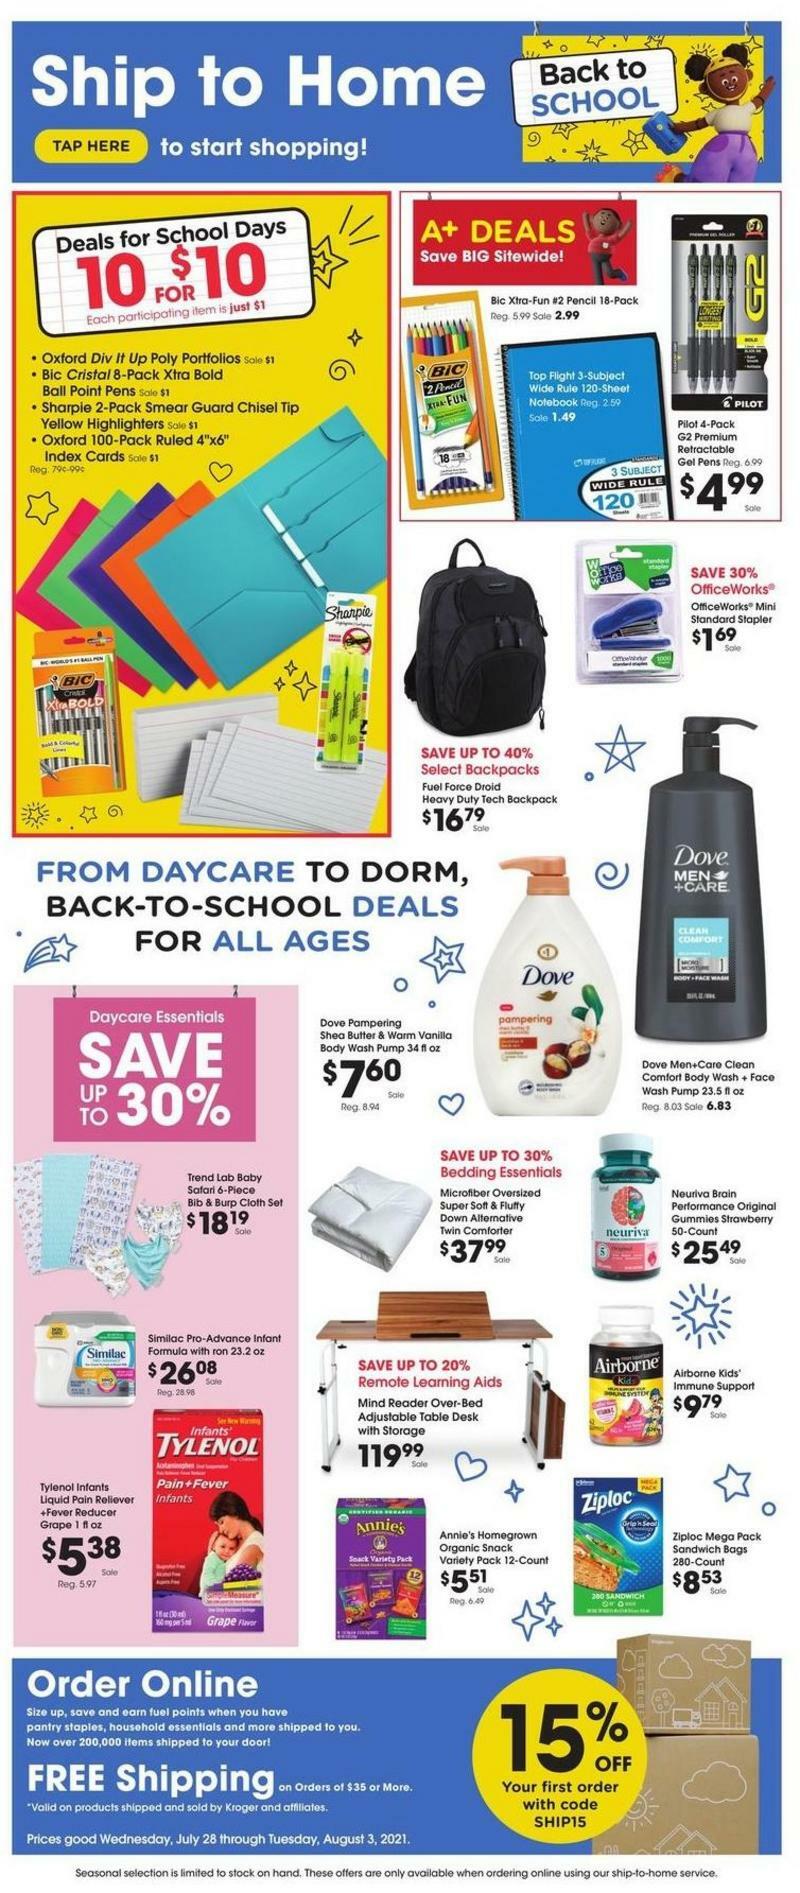 Fred Meyer Ship to Home Weekly Ad from July 28